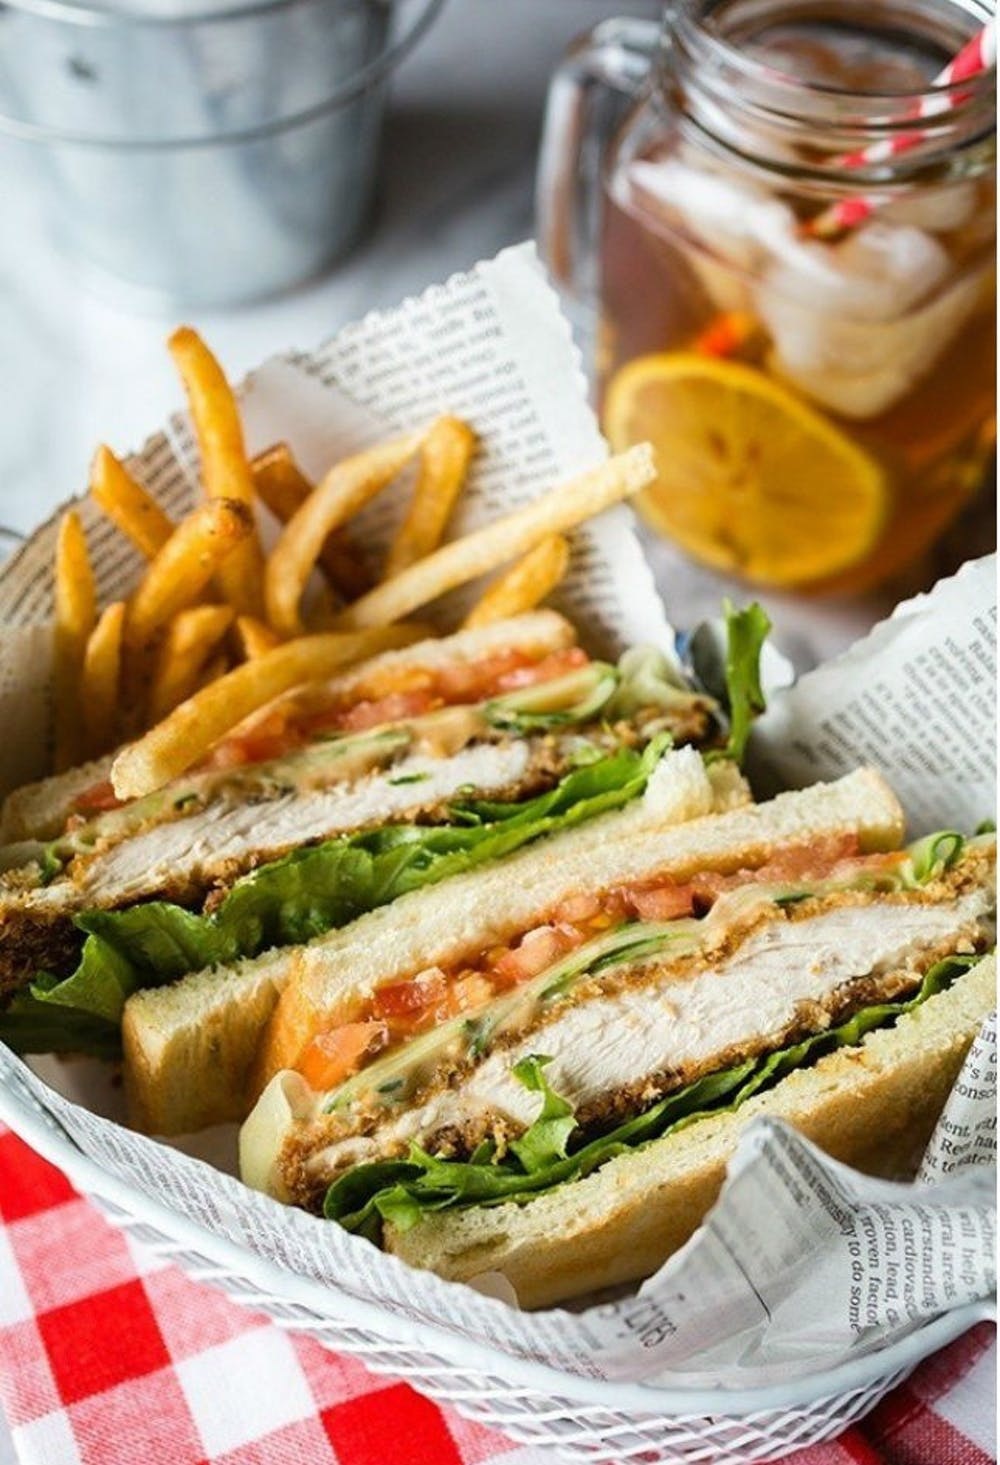 23 Creative Sandwich Recipes to Make Your Coworkers Jealous at Lunch